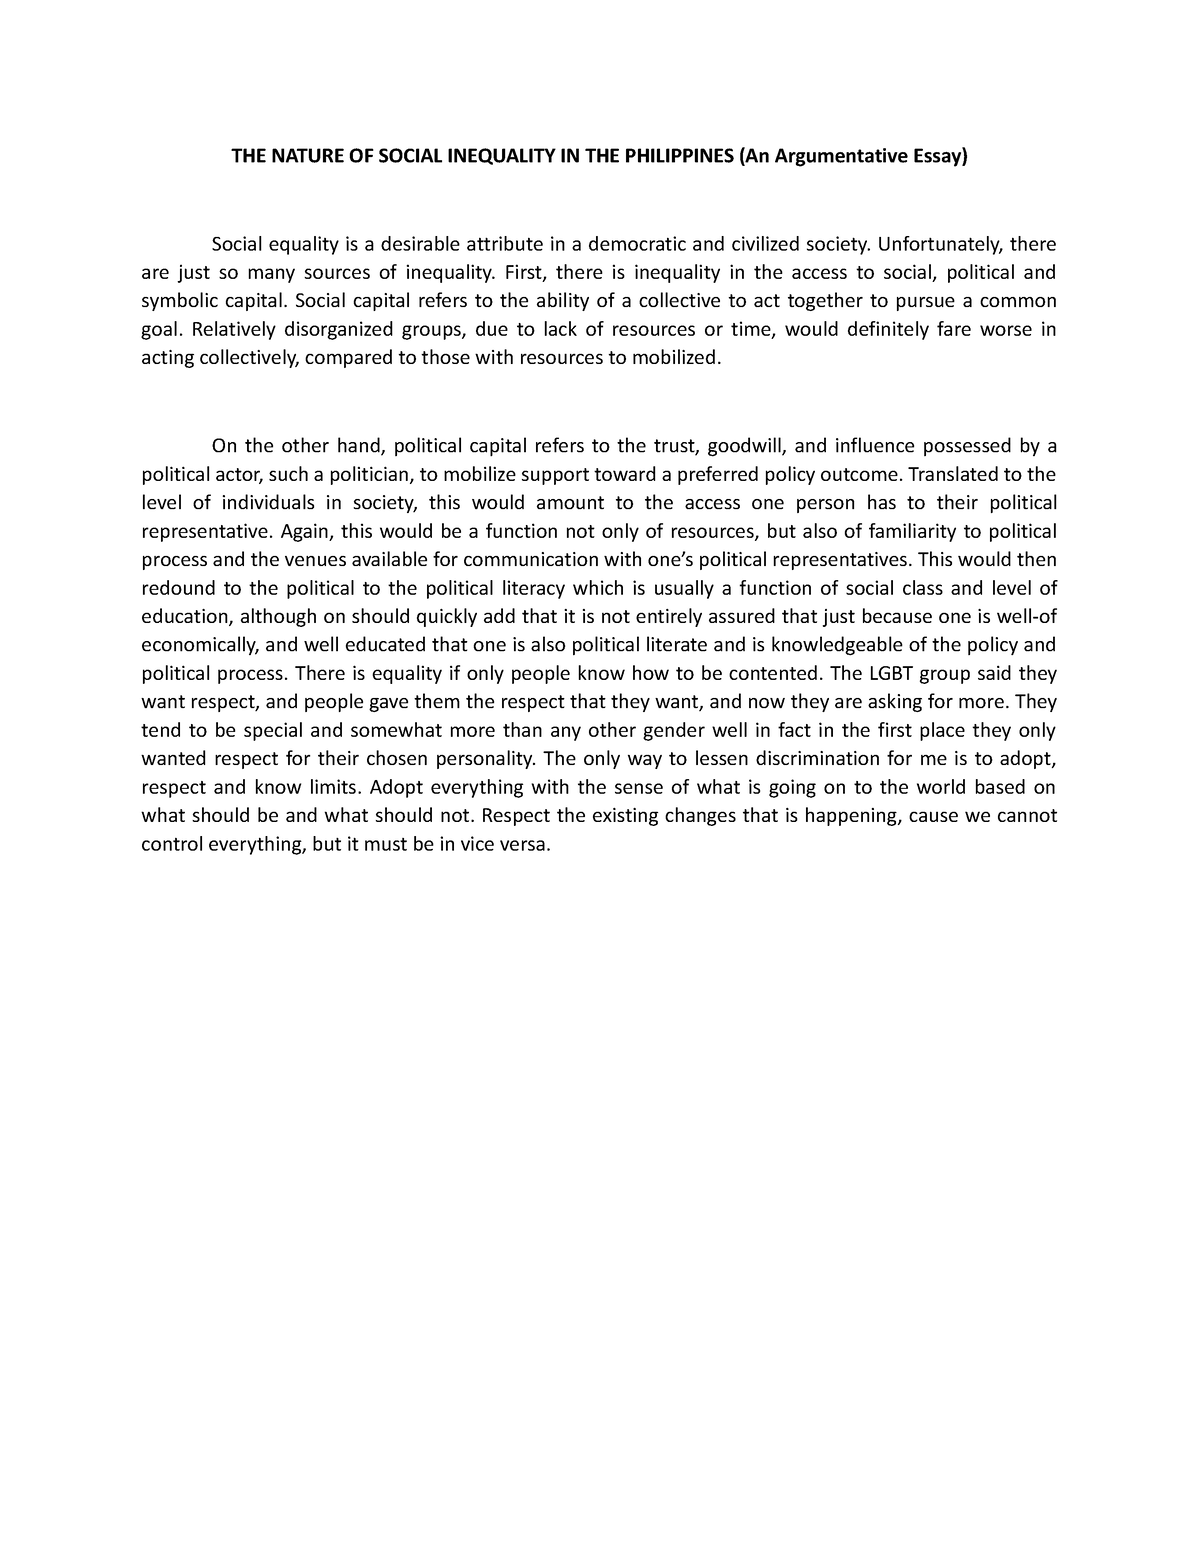 argumentative essay about nature of social inequality in the philippines